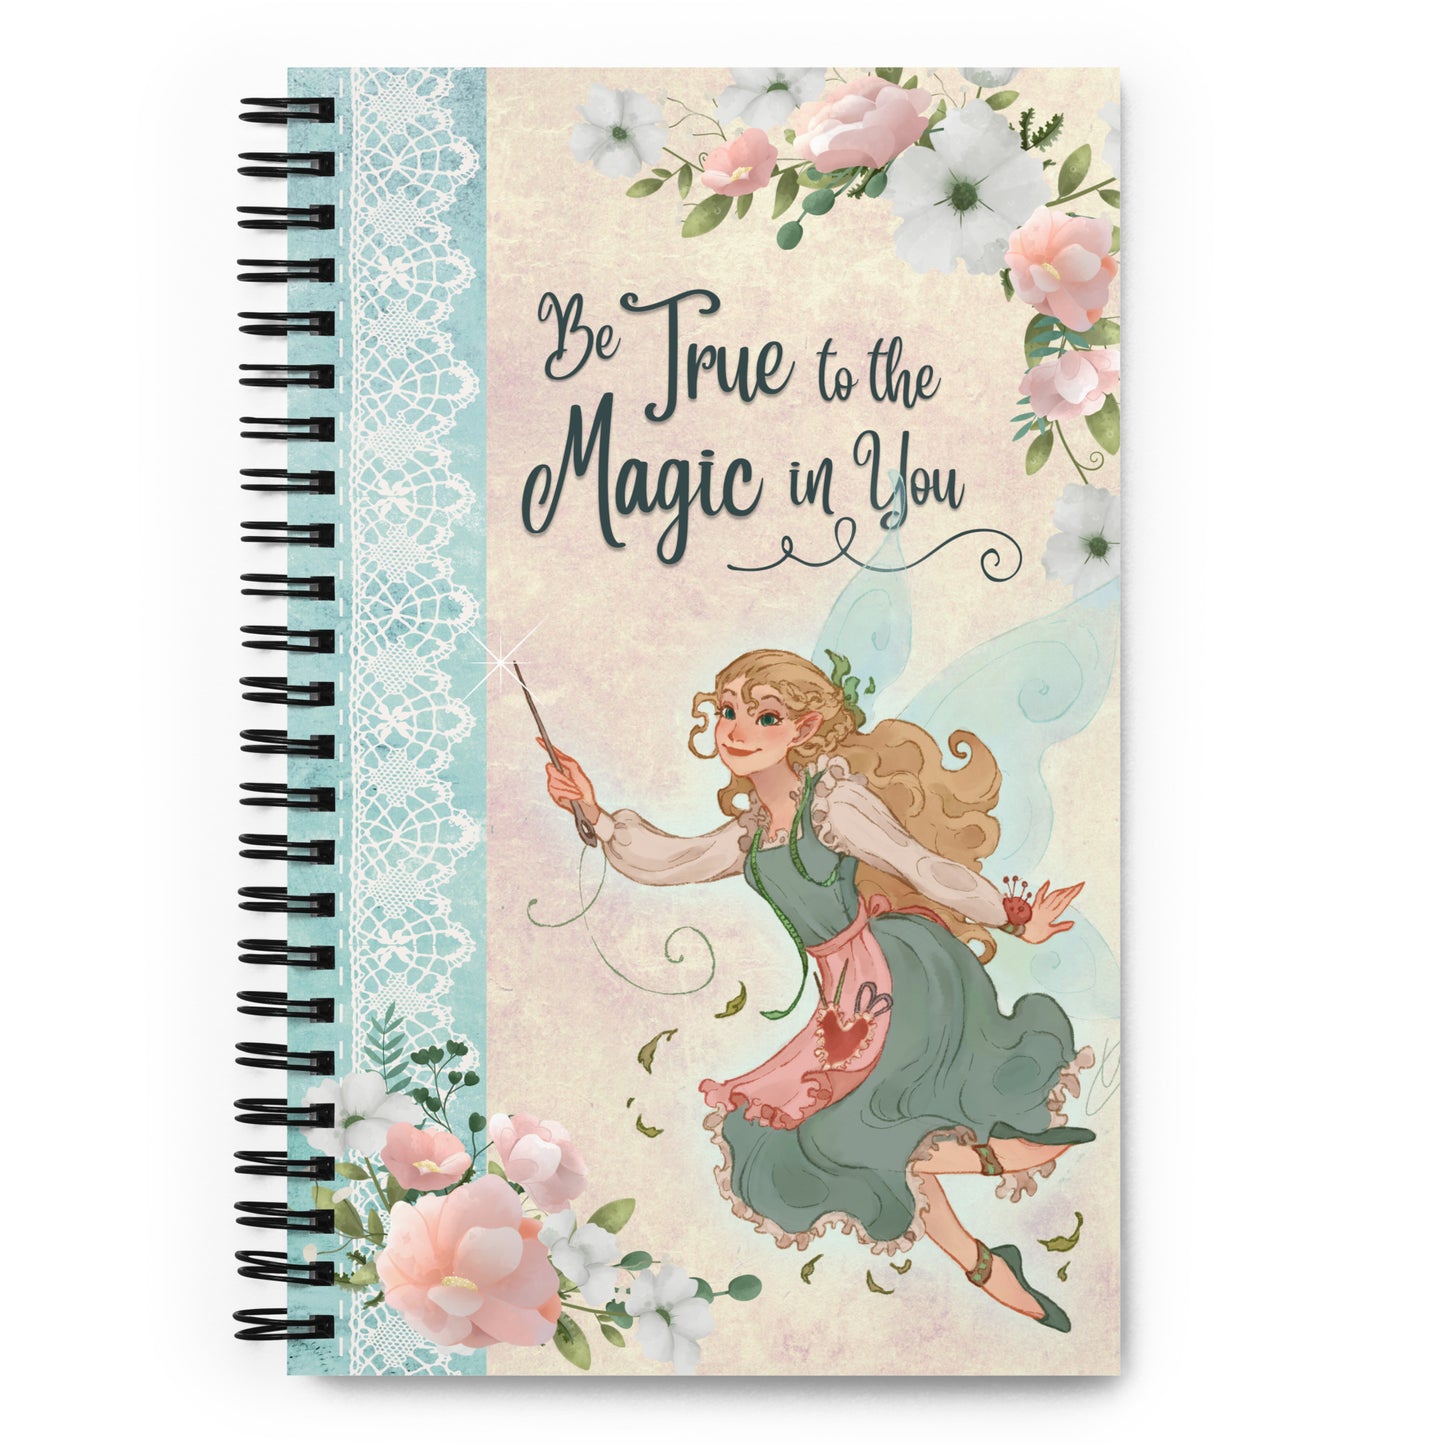 "Be True to the Magic in You" Bullet Journal Spiral Notebook - The Doll Fairy